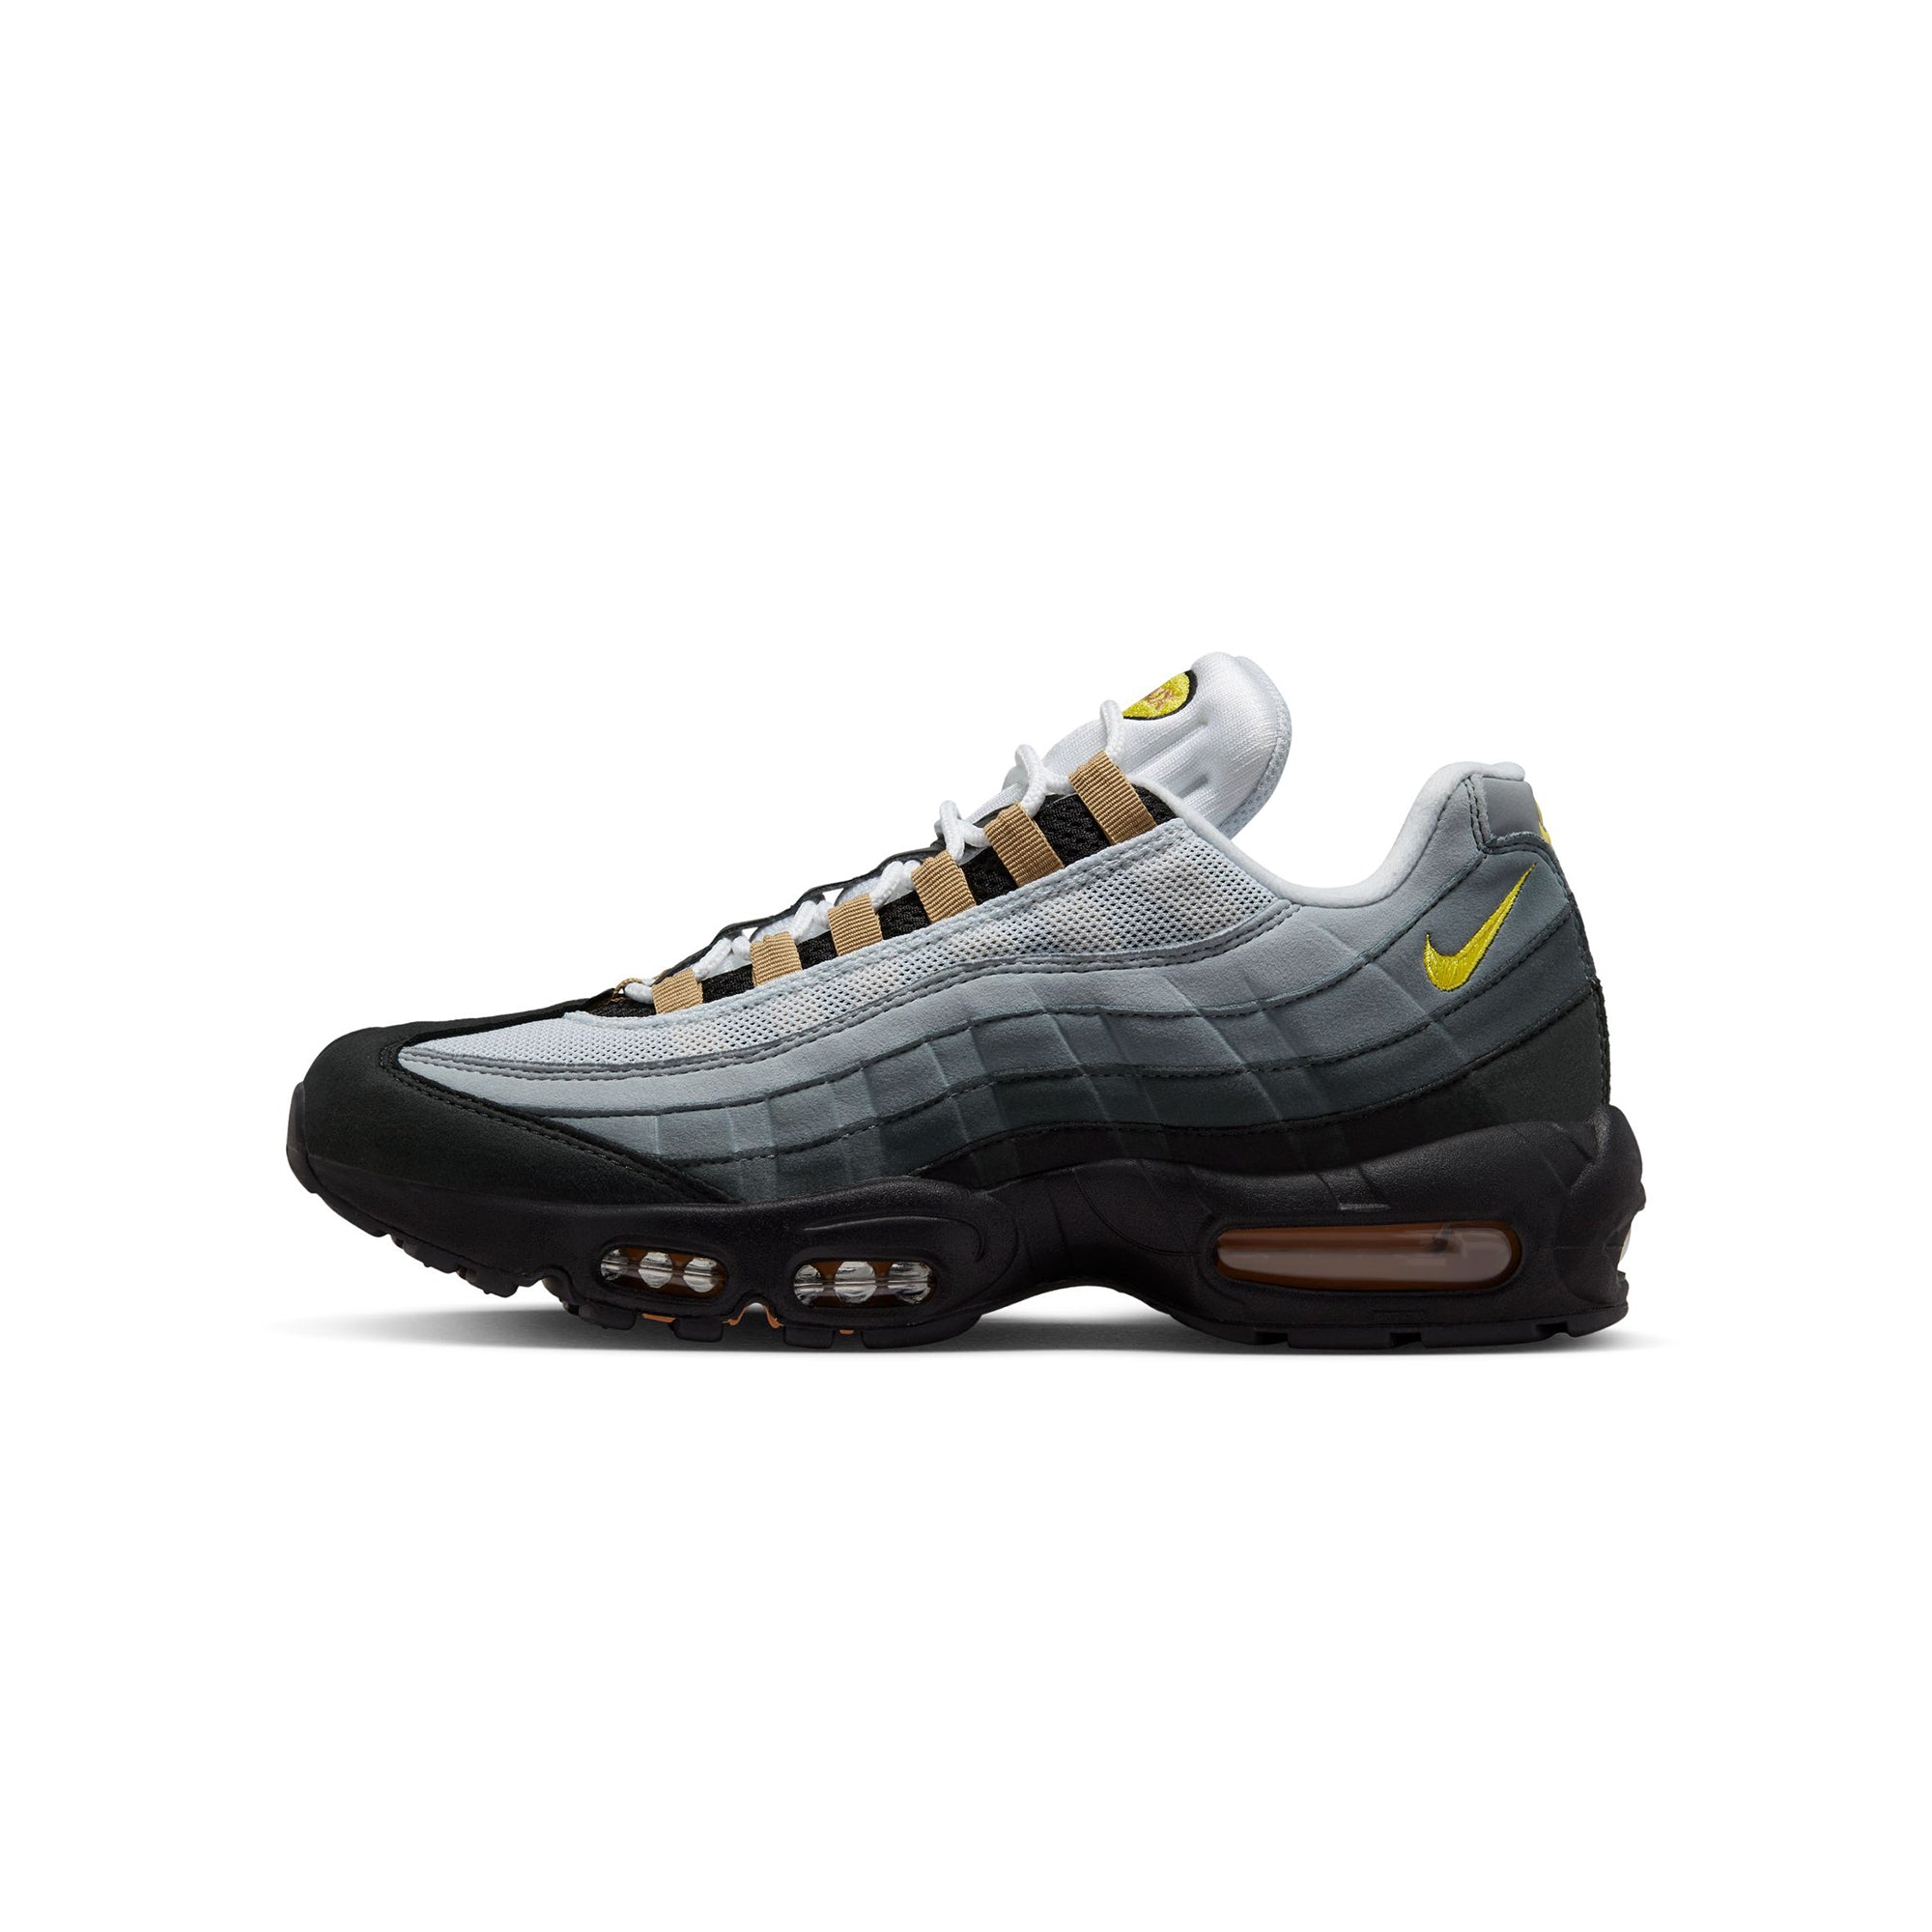 Nike Mens Air Max Shoes Butter